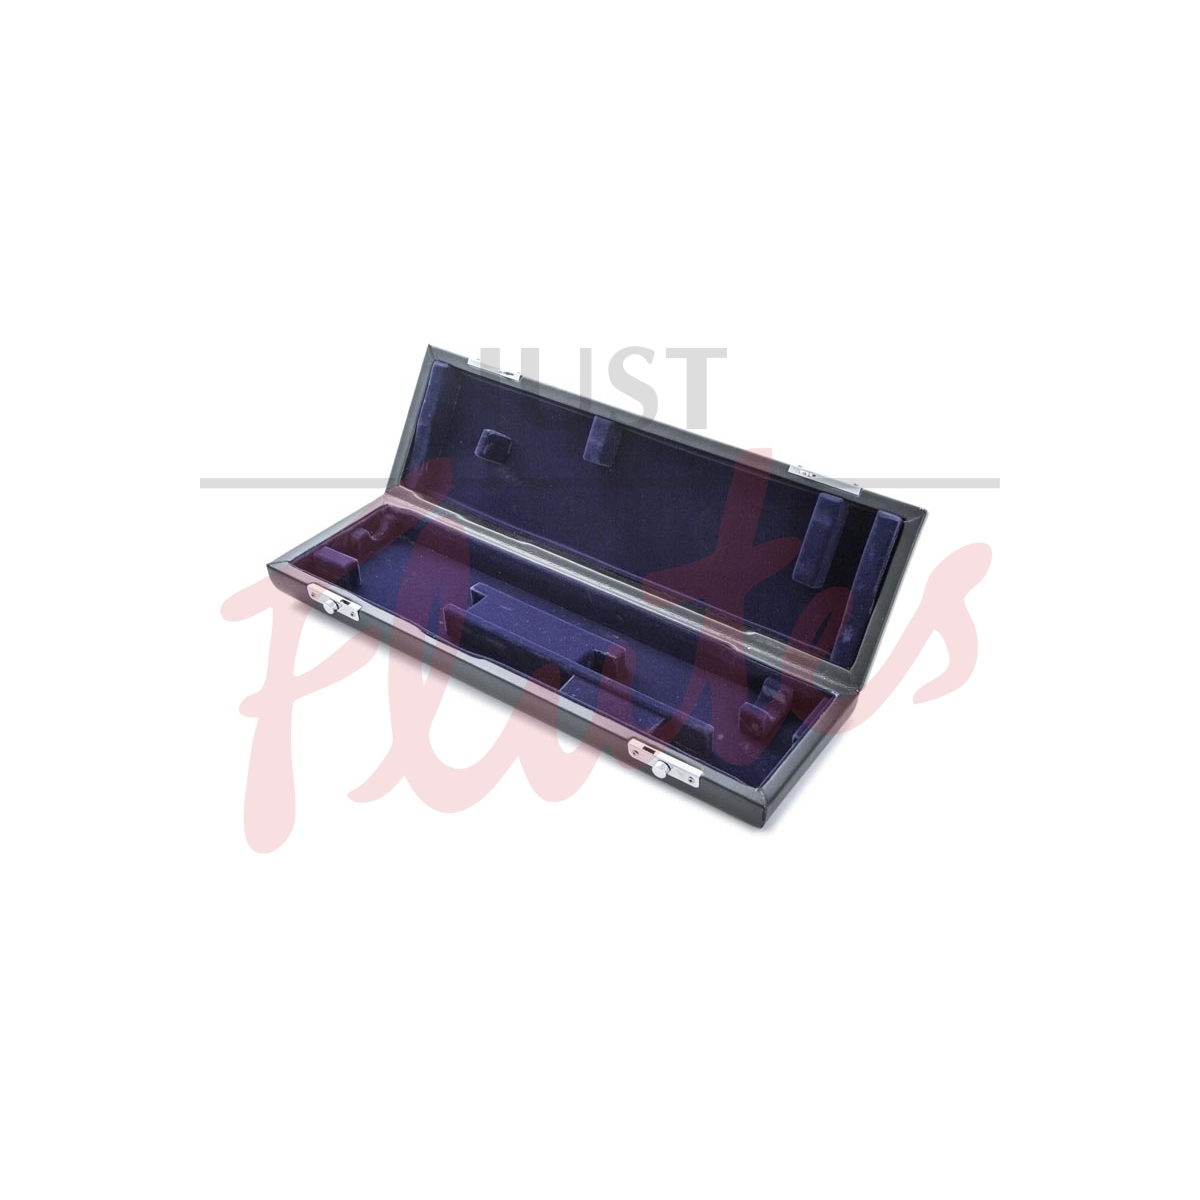 Just Flutes AFC-201EU Case for Curved Head Flute